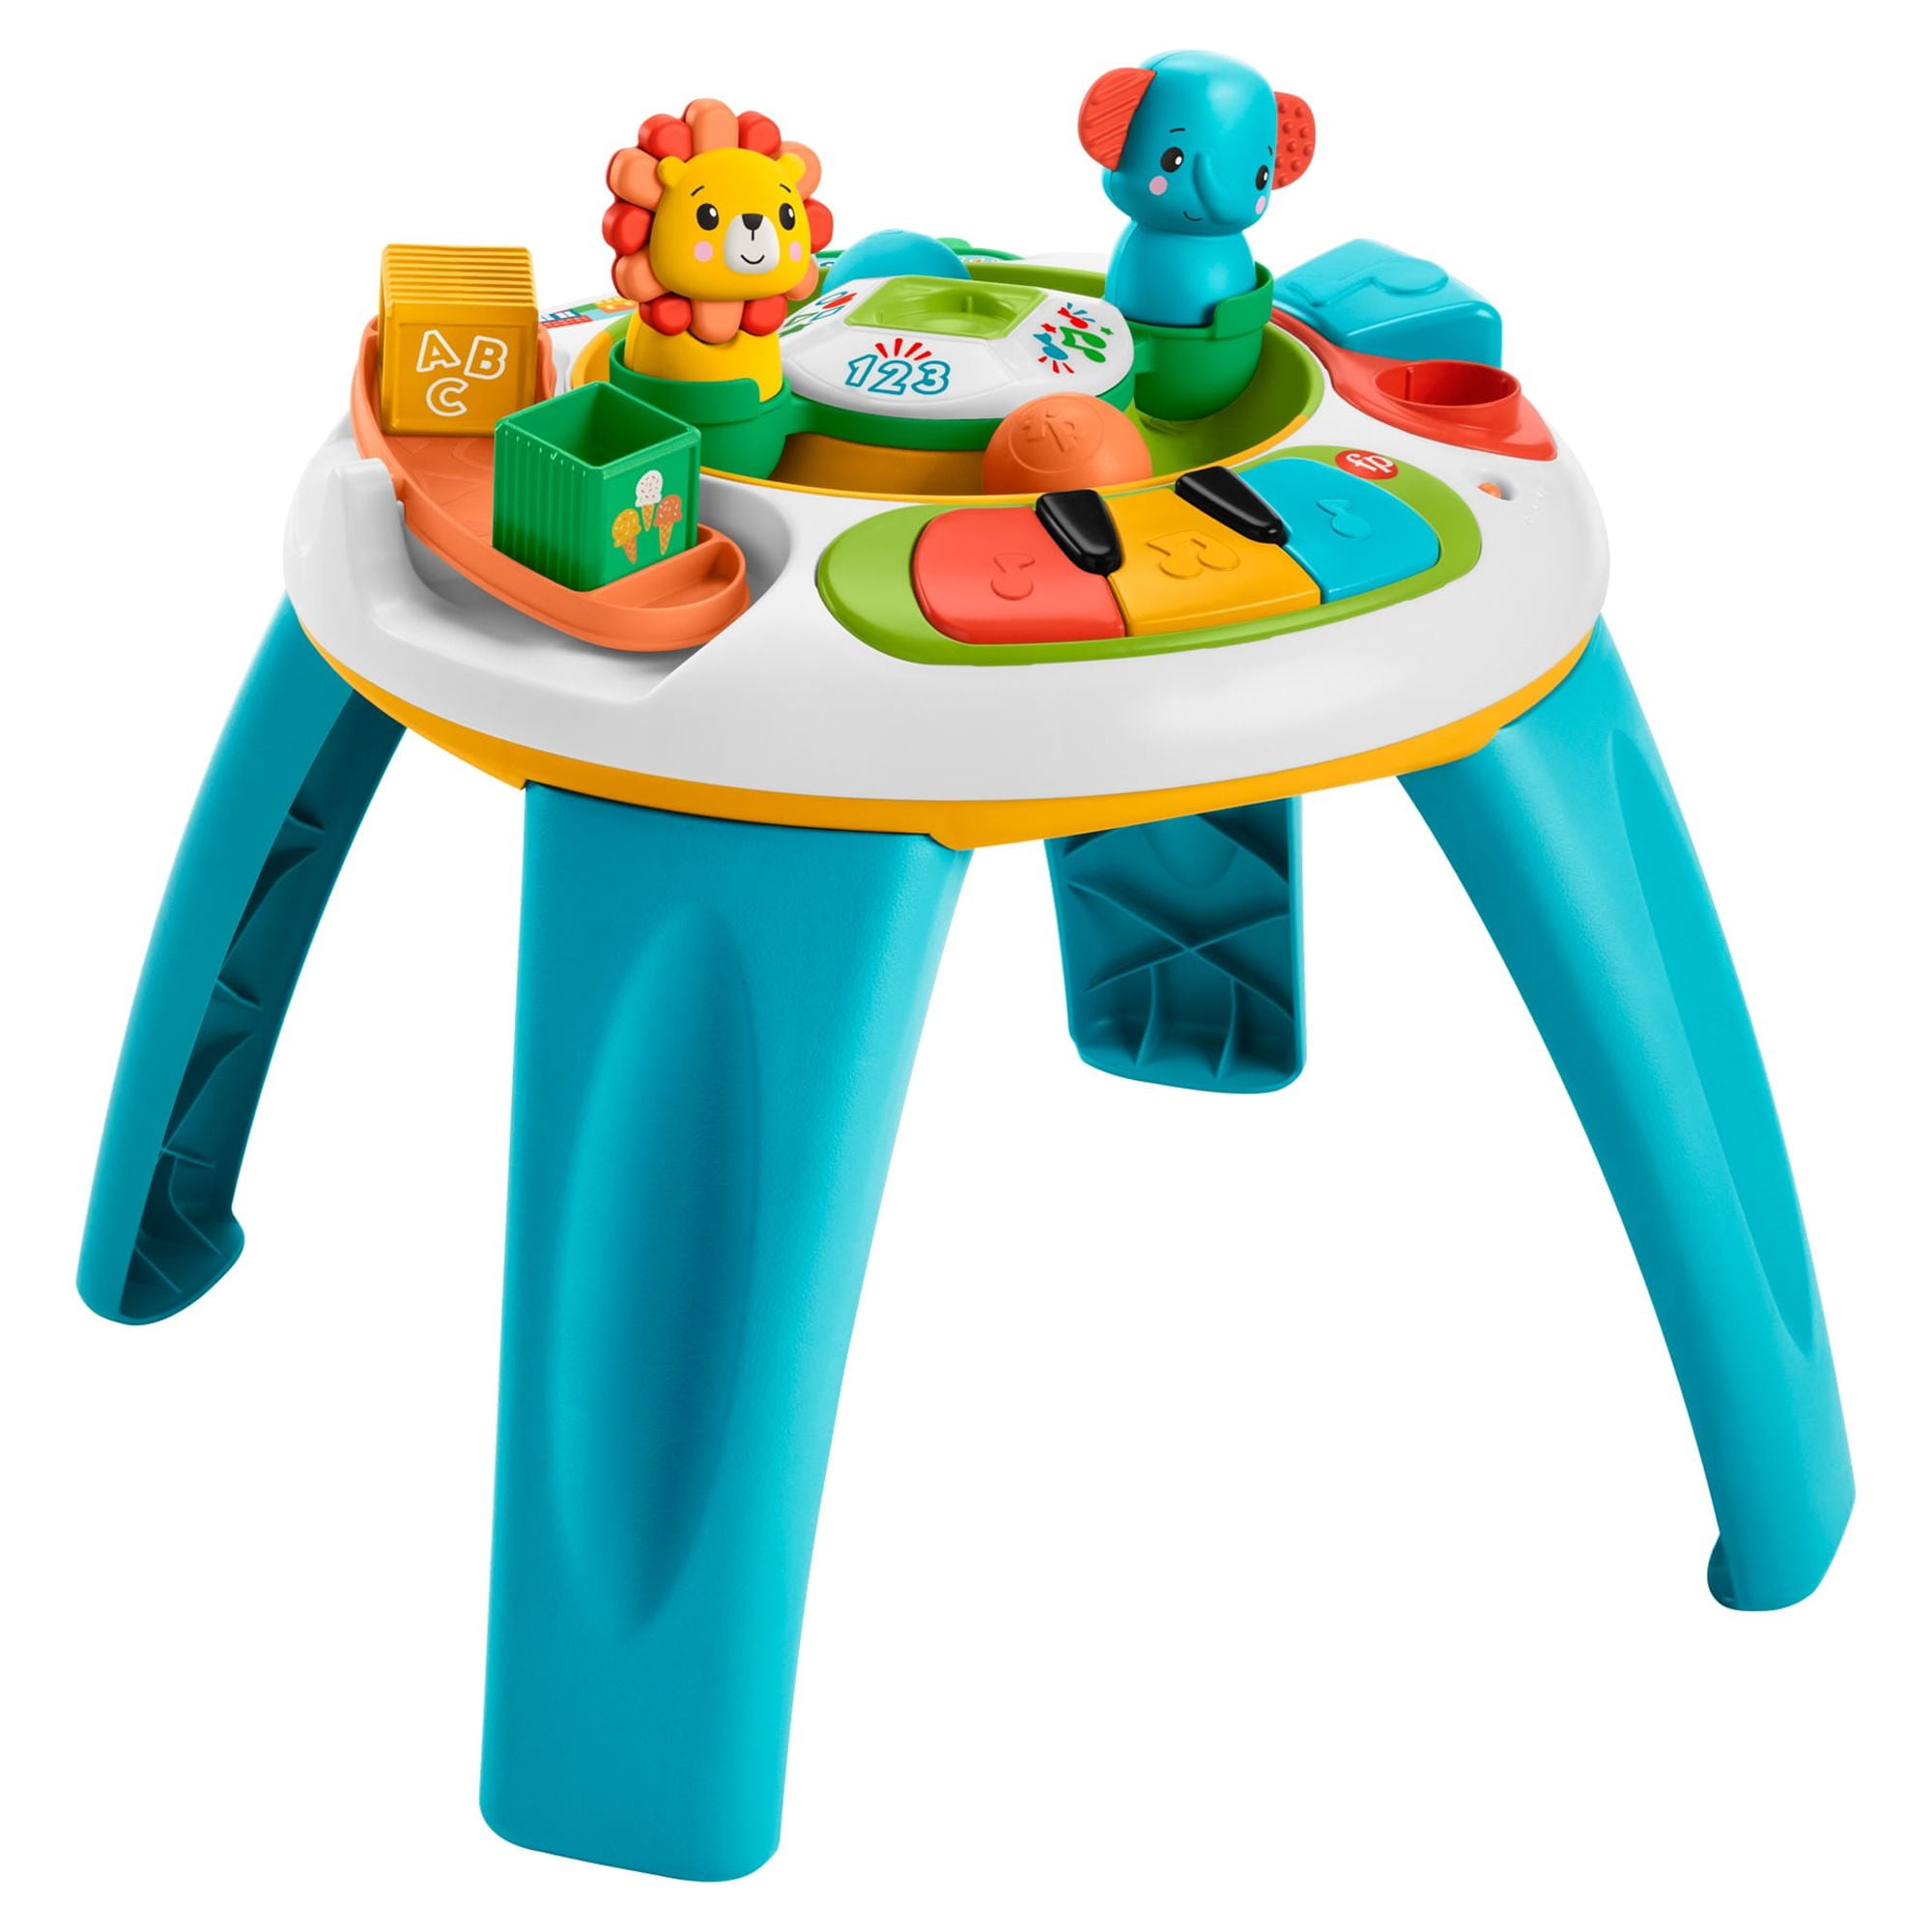 Travel Toys for Big Kids - Busy Toddler